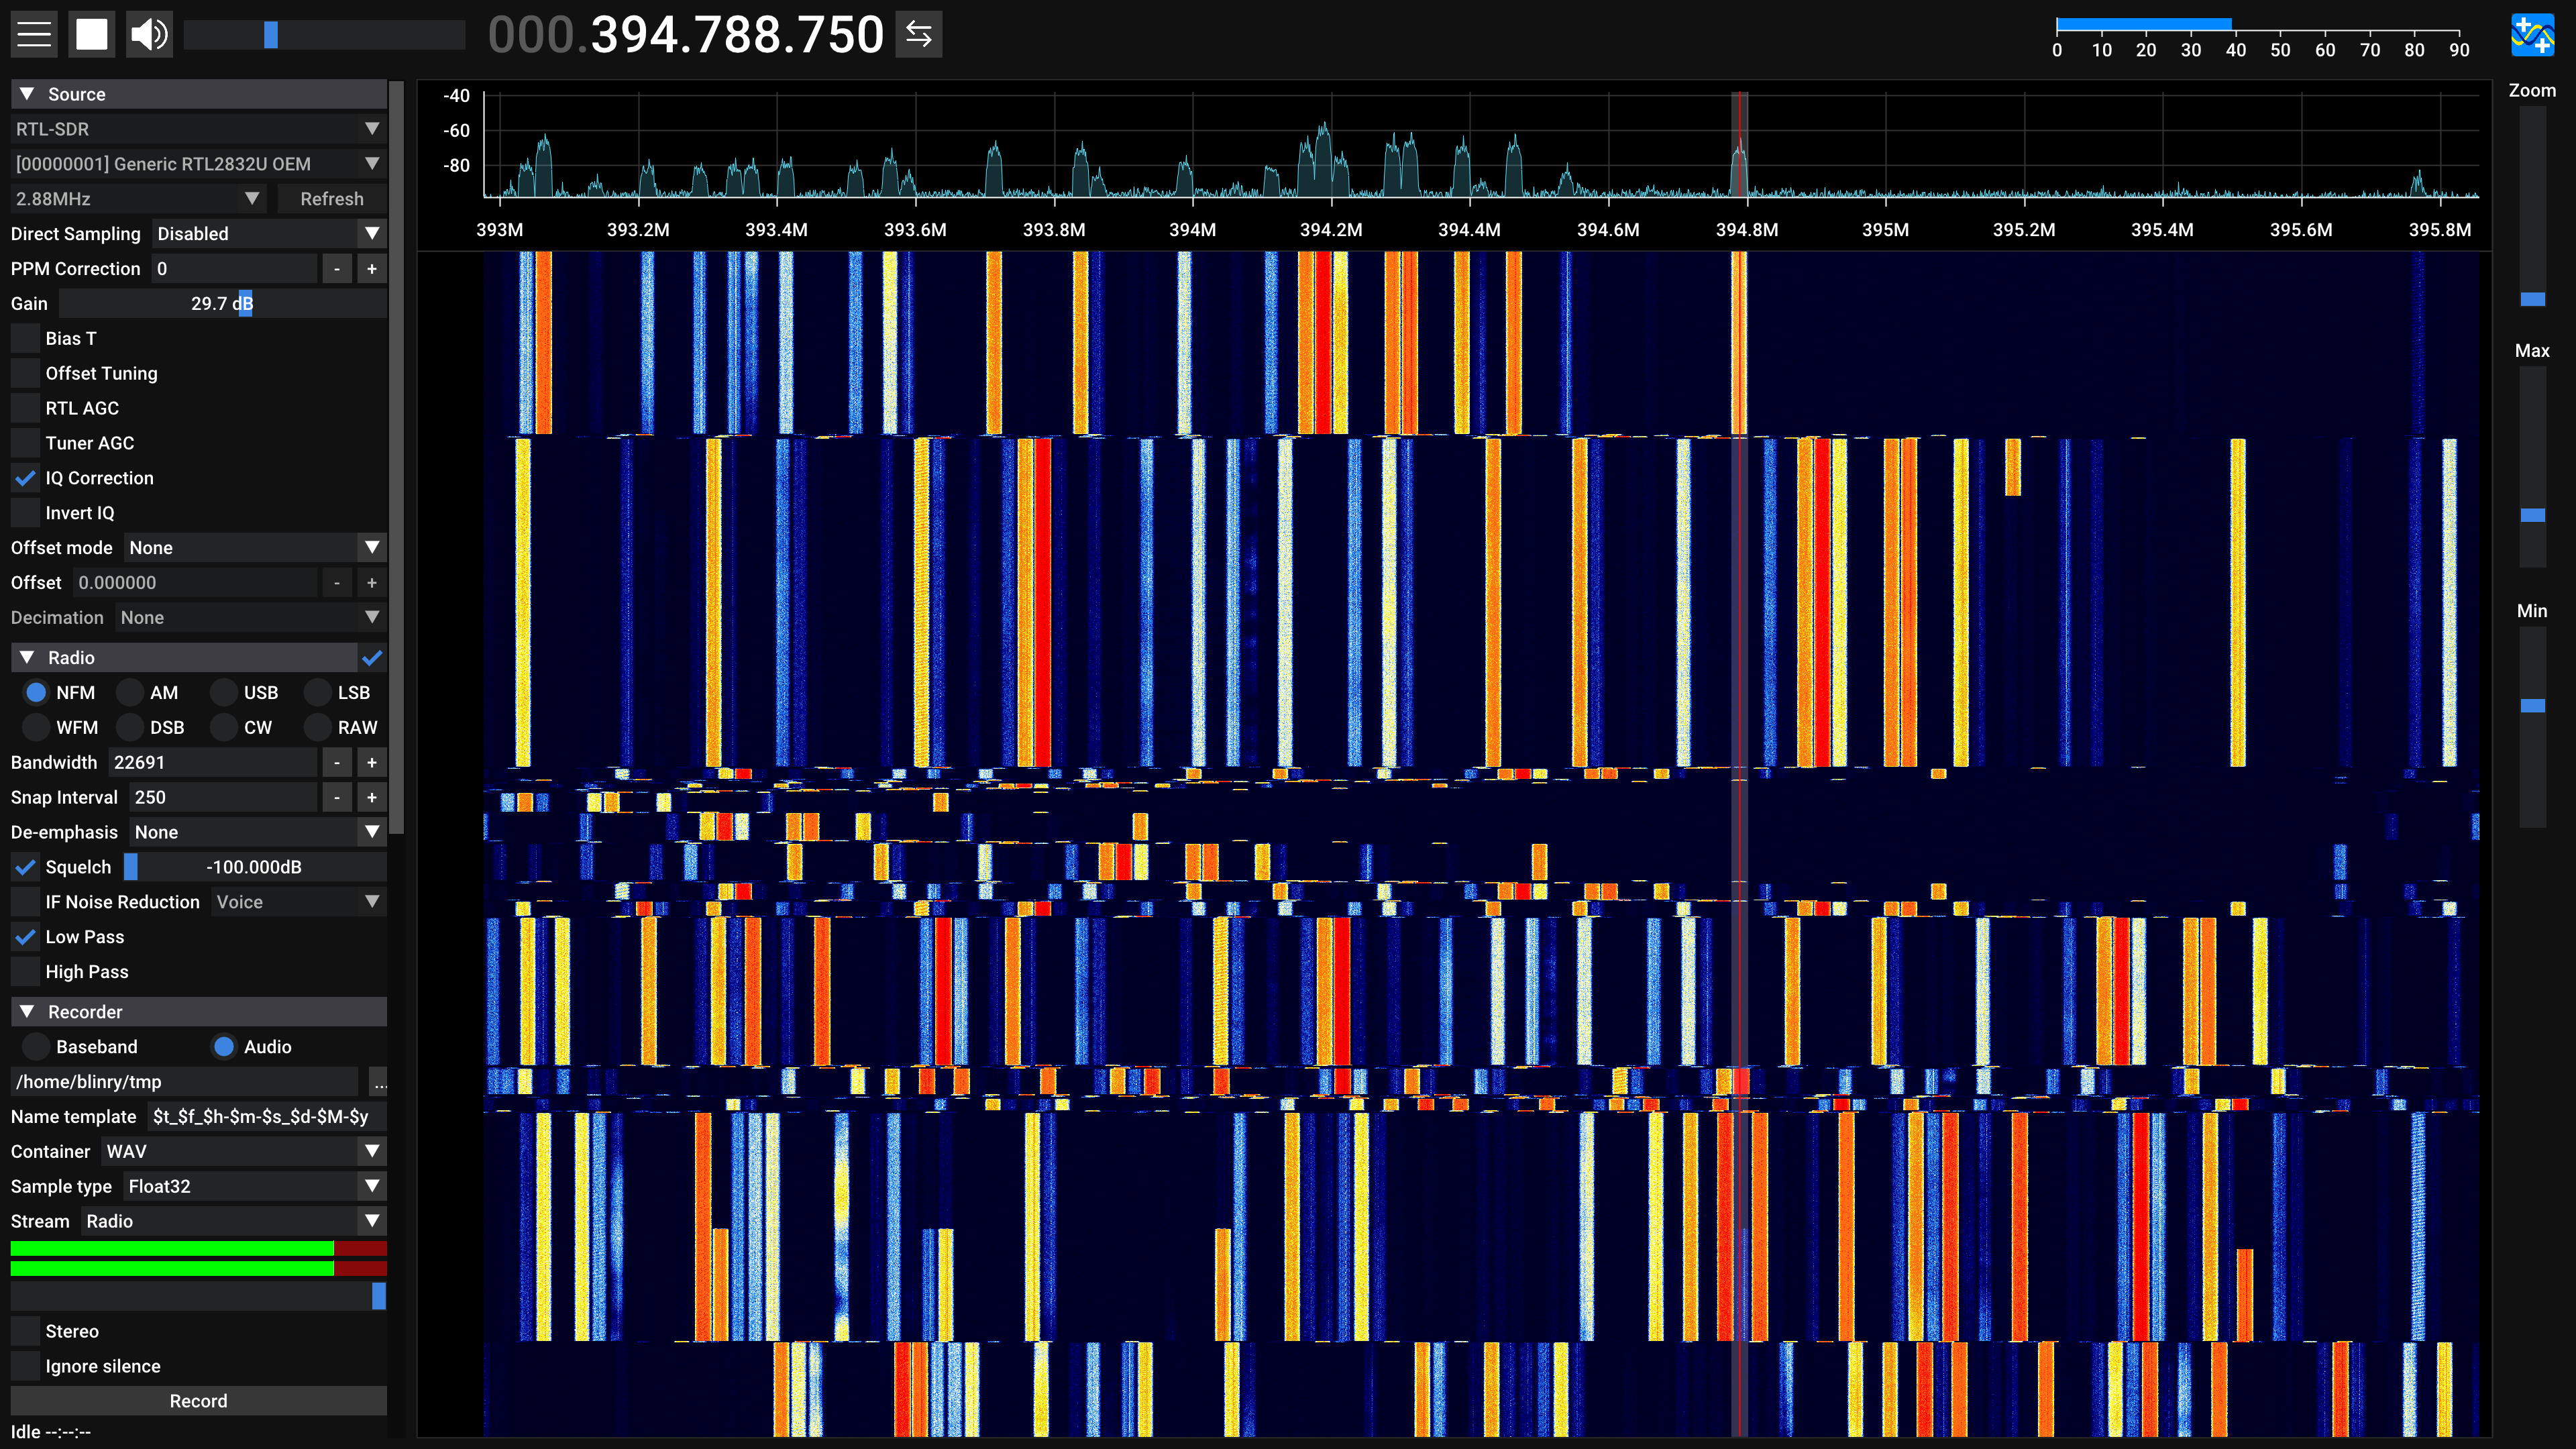 Colorful, very orderly strips in a waterfall diagram.